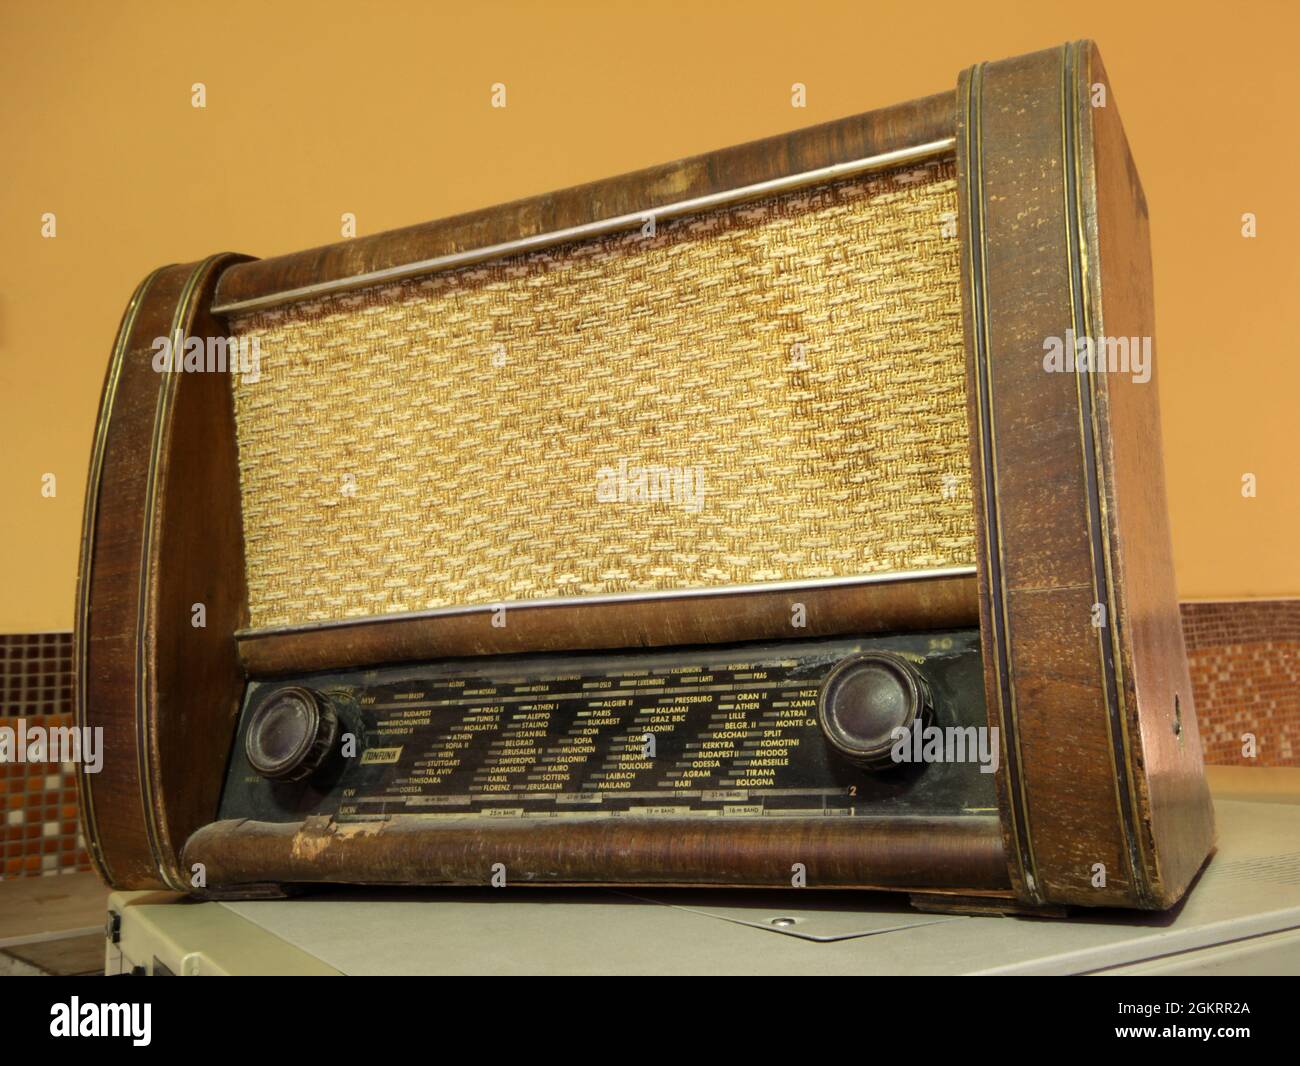 Page 2 - 1950 1959 High Resolution Stock Photography and Images - Alamy